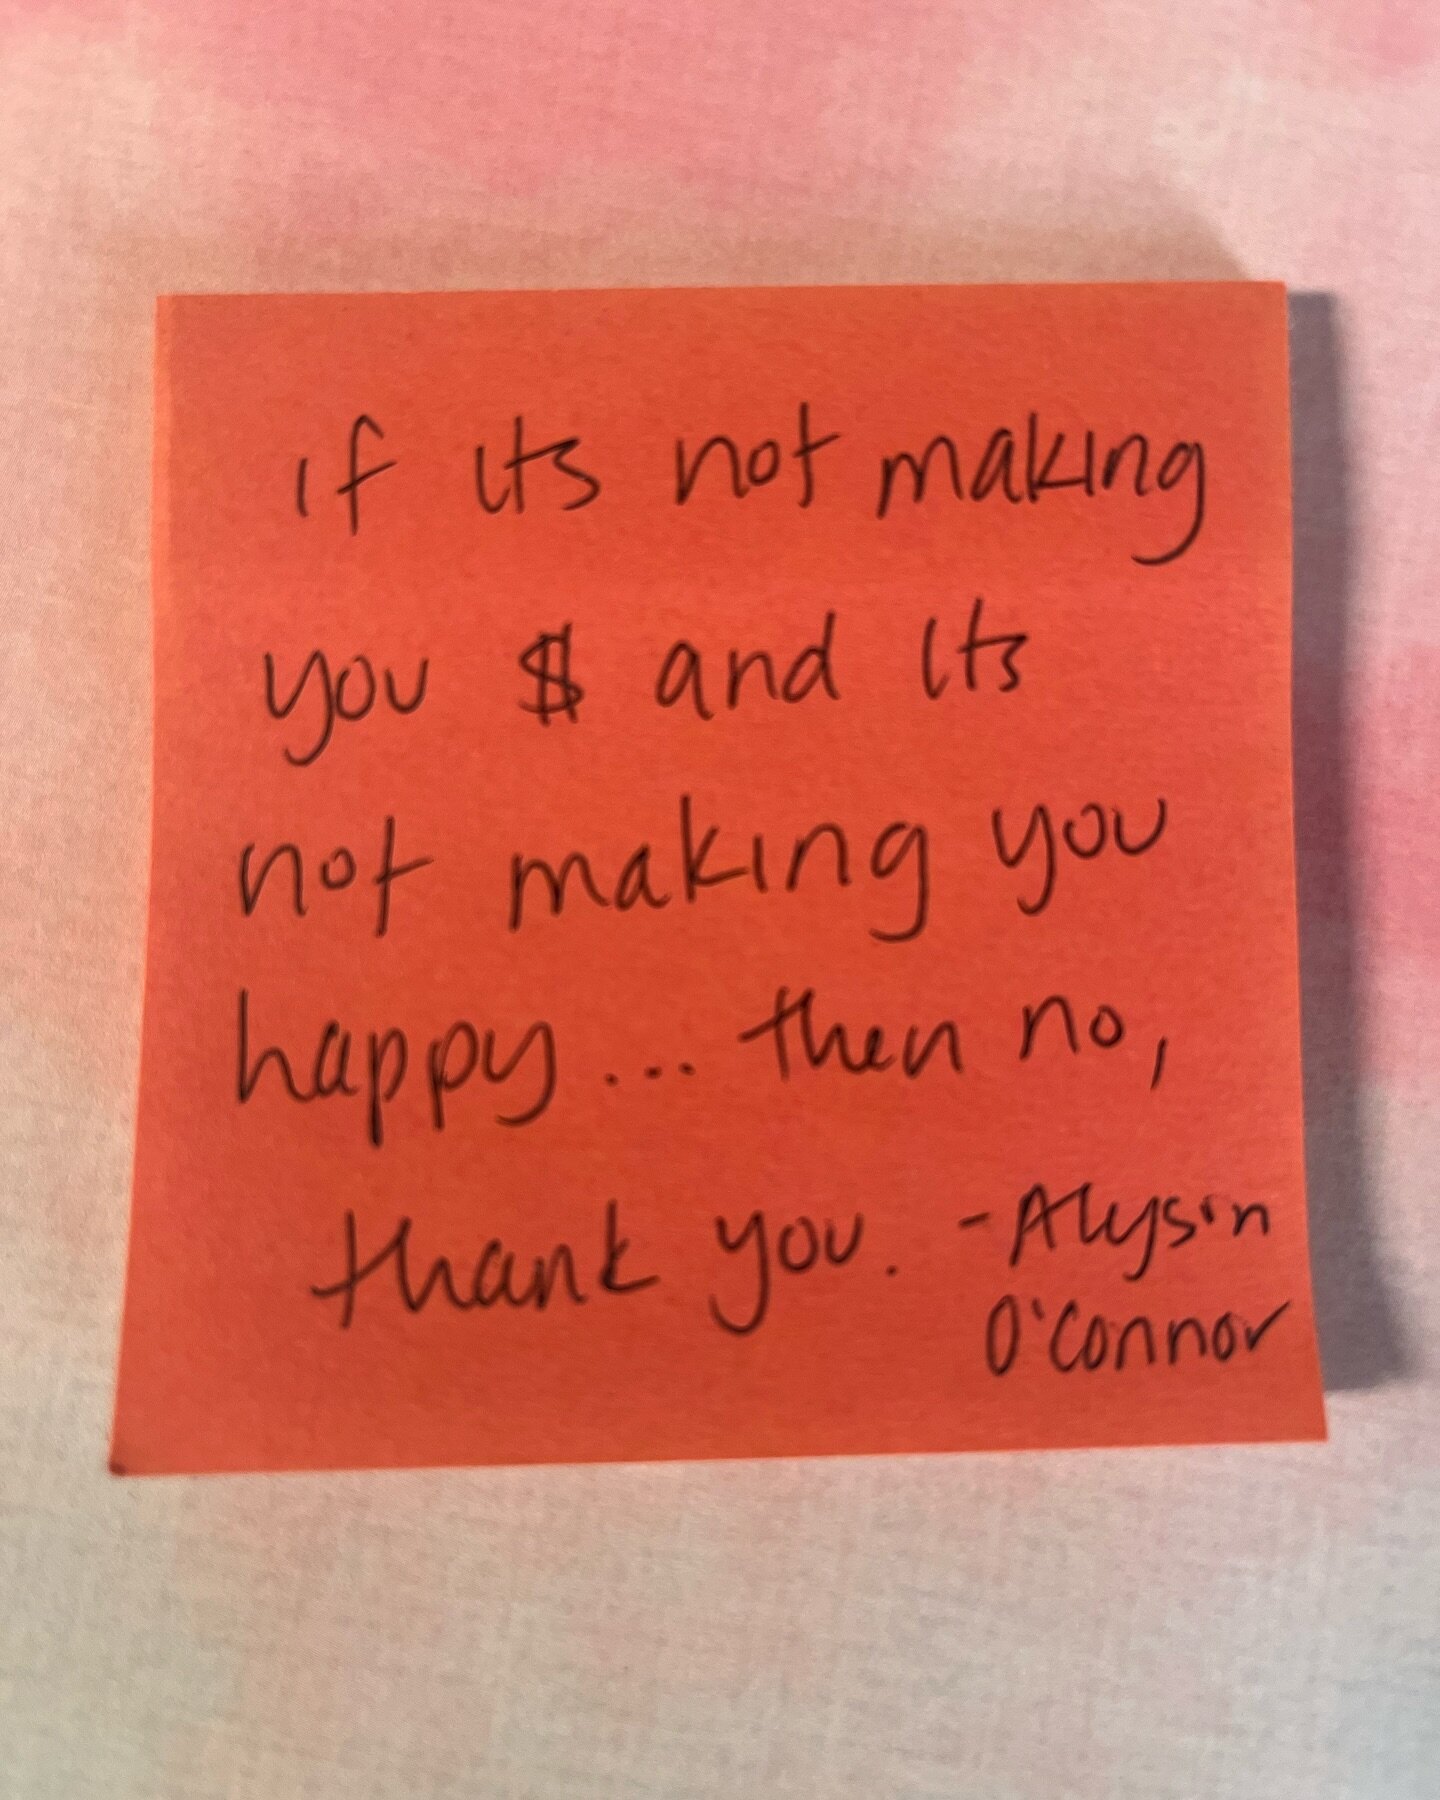 A friendly Friday reminder from @rustbeltlove. 

You set the rules for your business, friends. If it&rsquo;s not making you money or bringing you happiness&hellip; let it go!